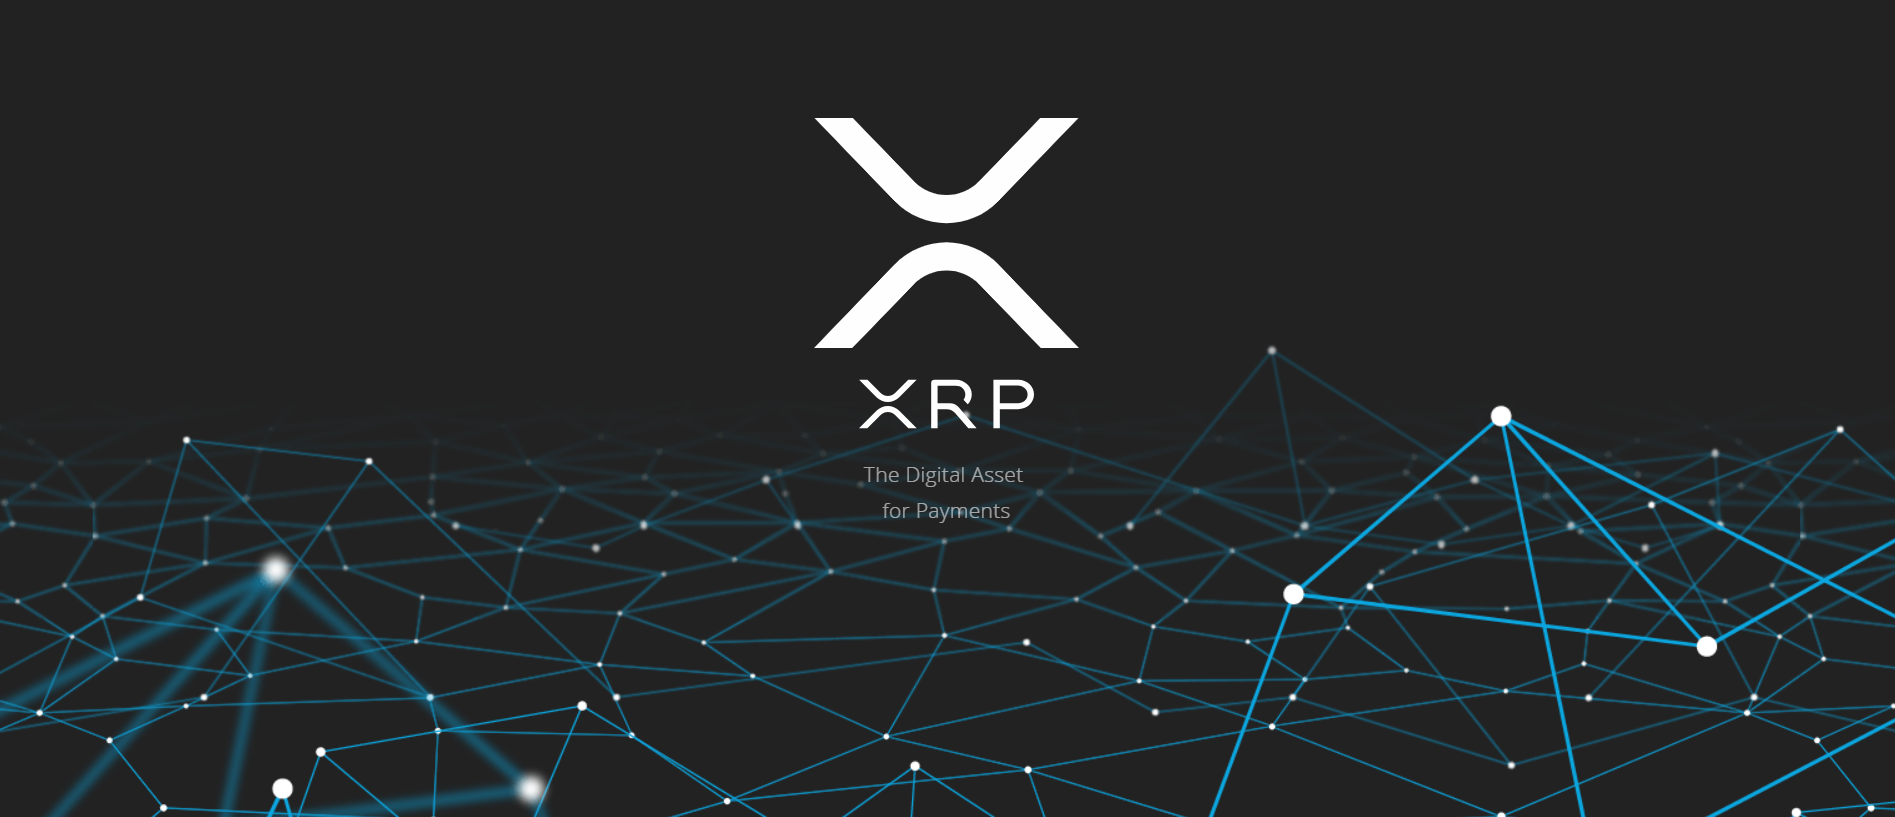 Is XRP still a good investment? Here's why I believe XRP ...